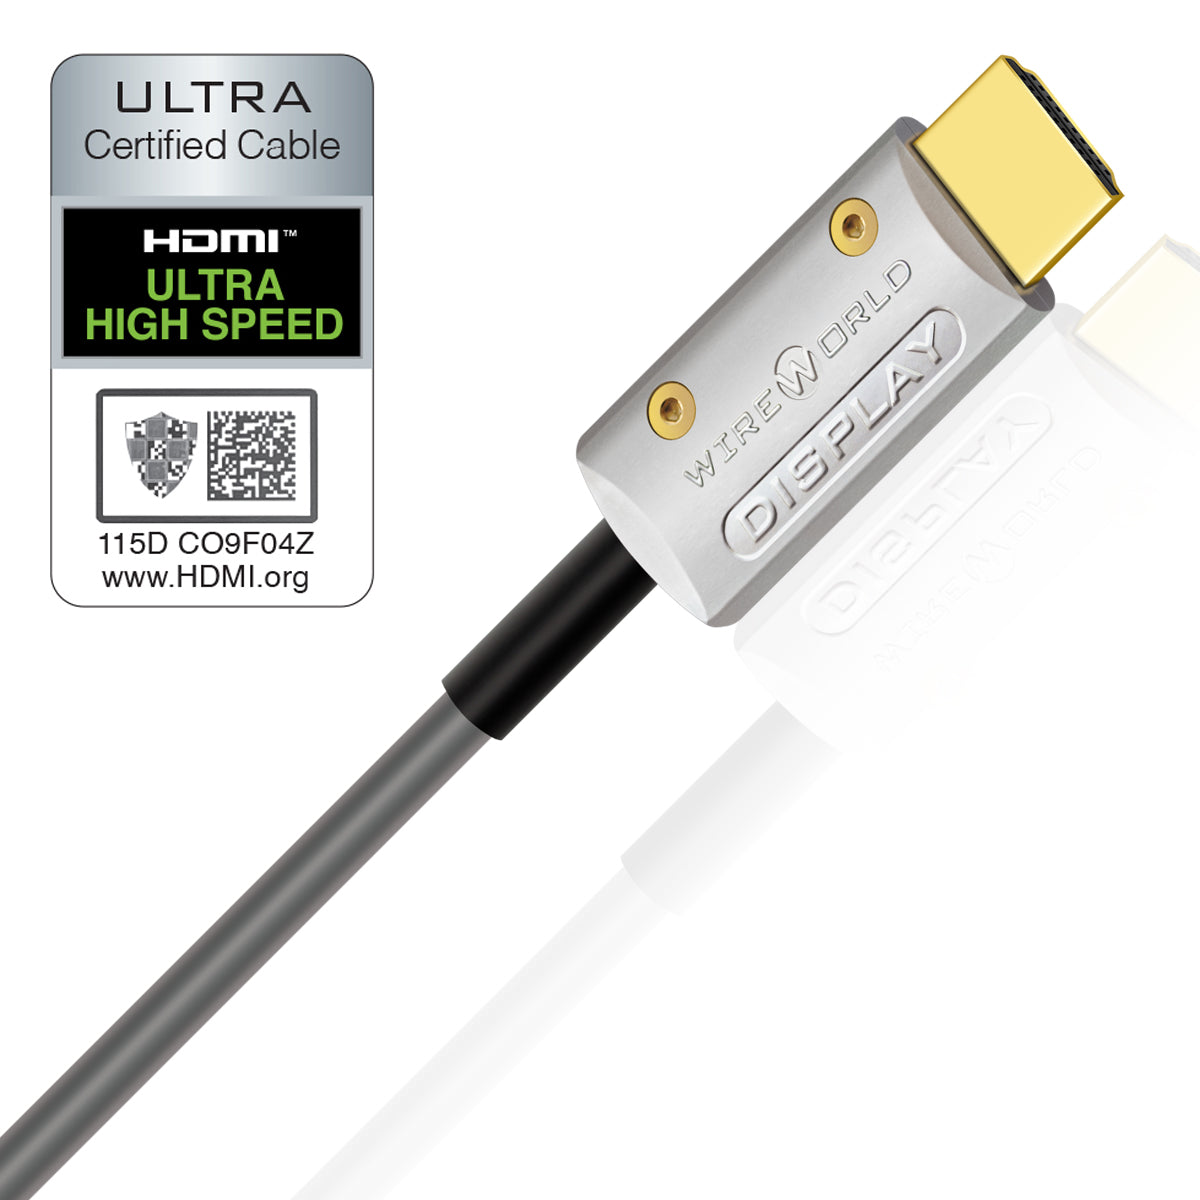 HDMI Audio Video Cables | High-End HDMI Cables | Wireworld